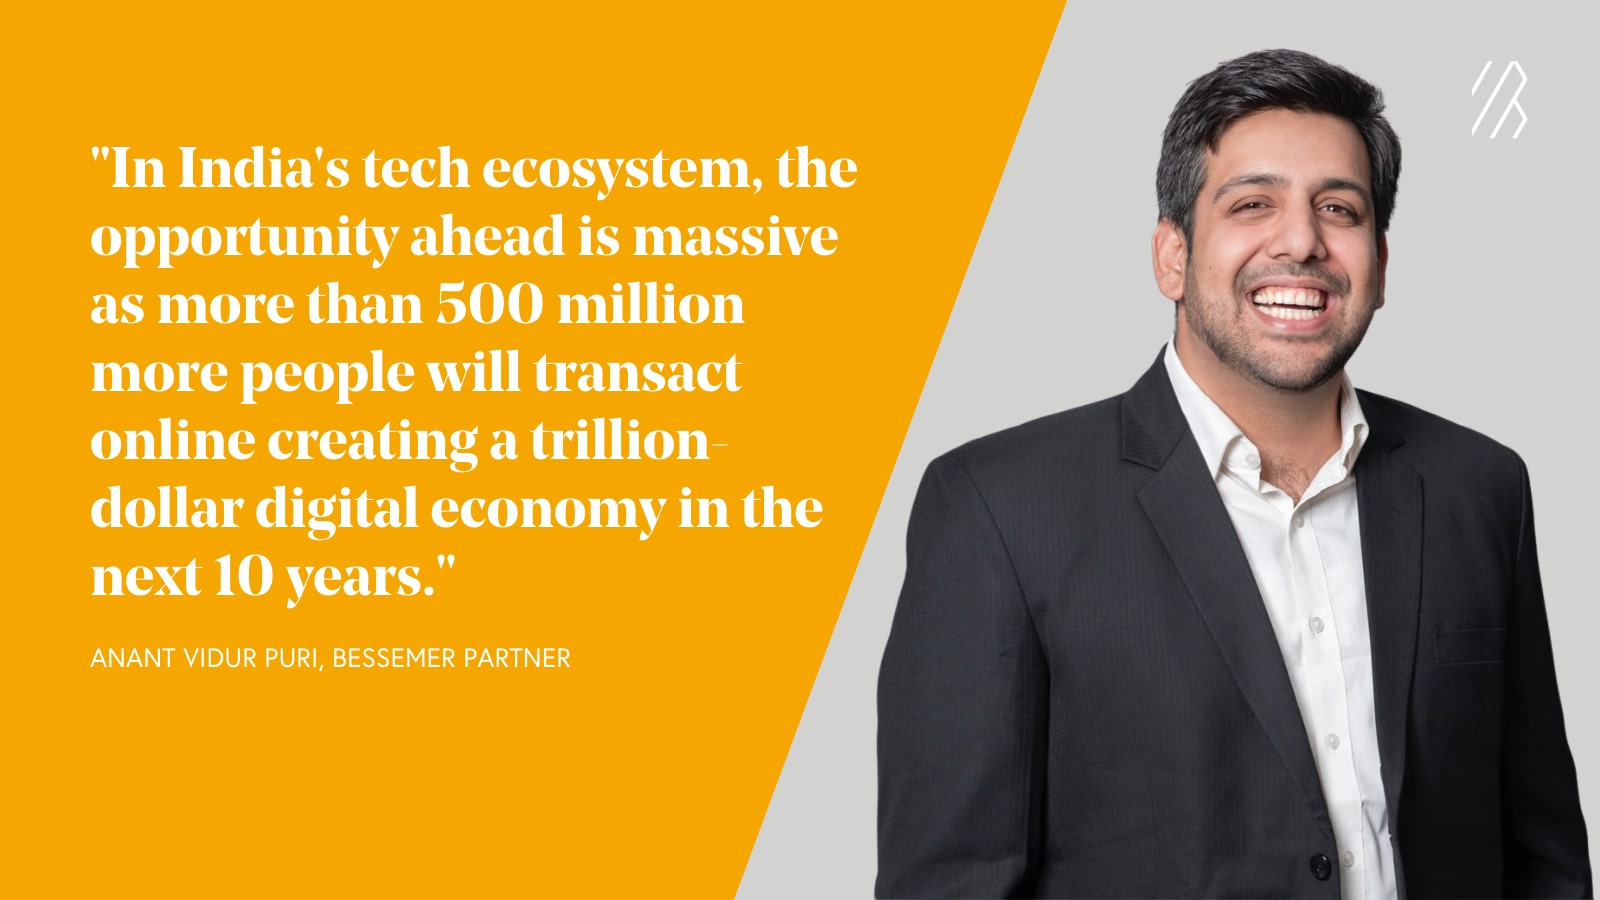 Photo of Anant Vidur Puri and text quote about India's tech ecosystem